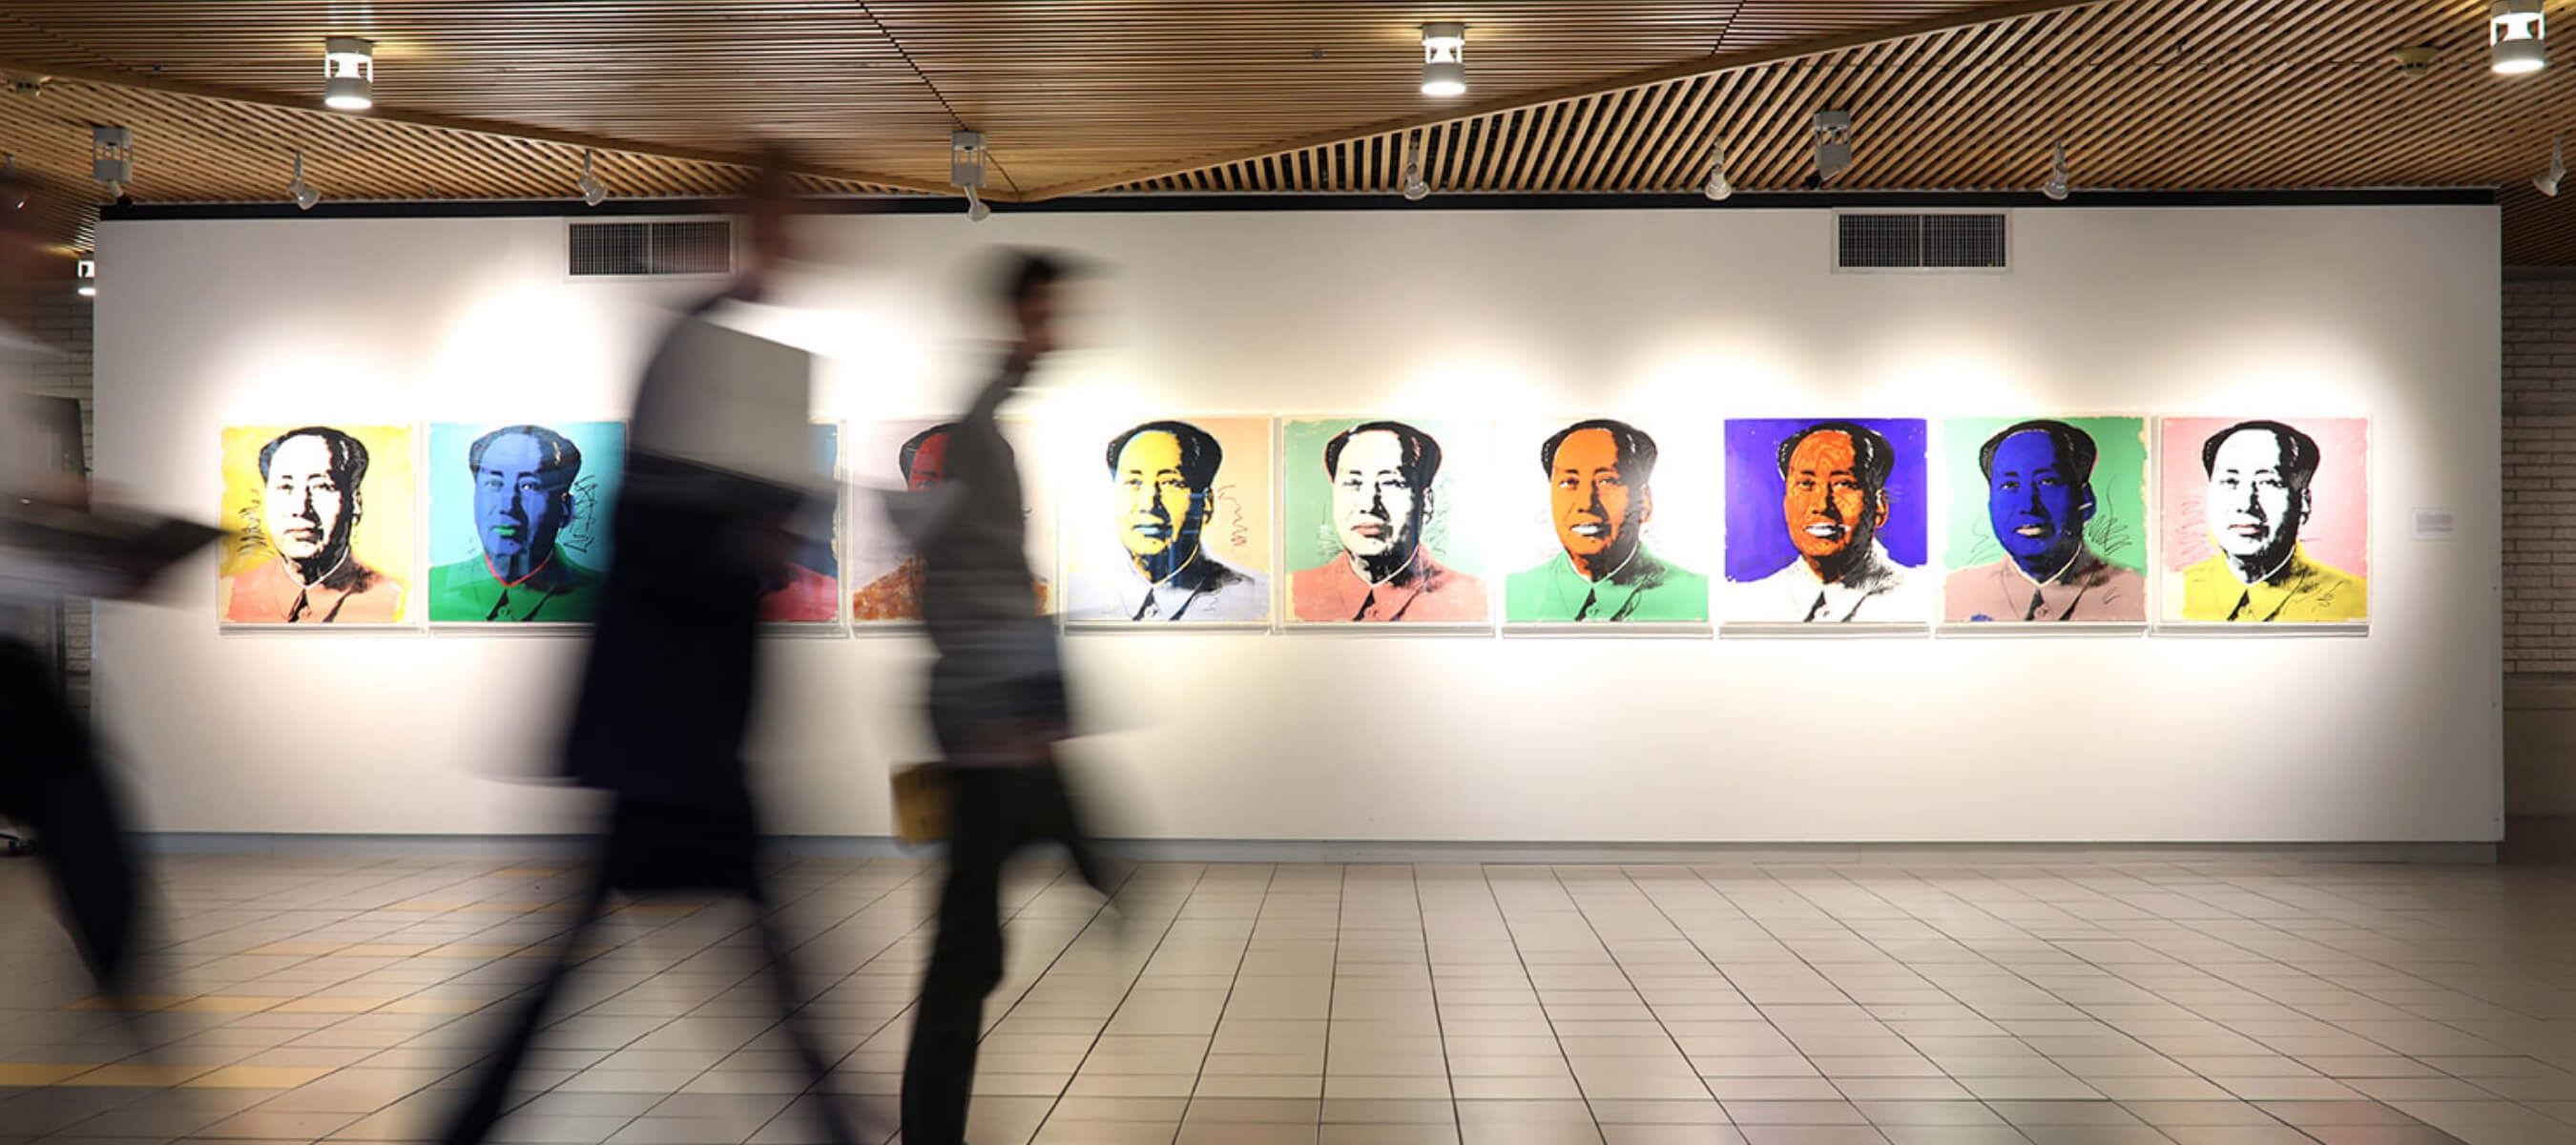 In an art gallery, eight pop art-style portraits of the same figure with different colored backgrounds are displayed on a white wall. Blurred figures of visitors pass by in the foreground, suggesting movement through the gallery. The portraits are illuminated by track lighting from the wood-paneled ceiling above the tiled floor.